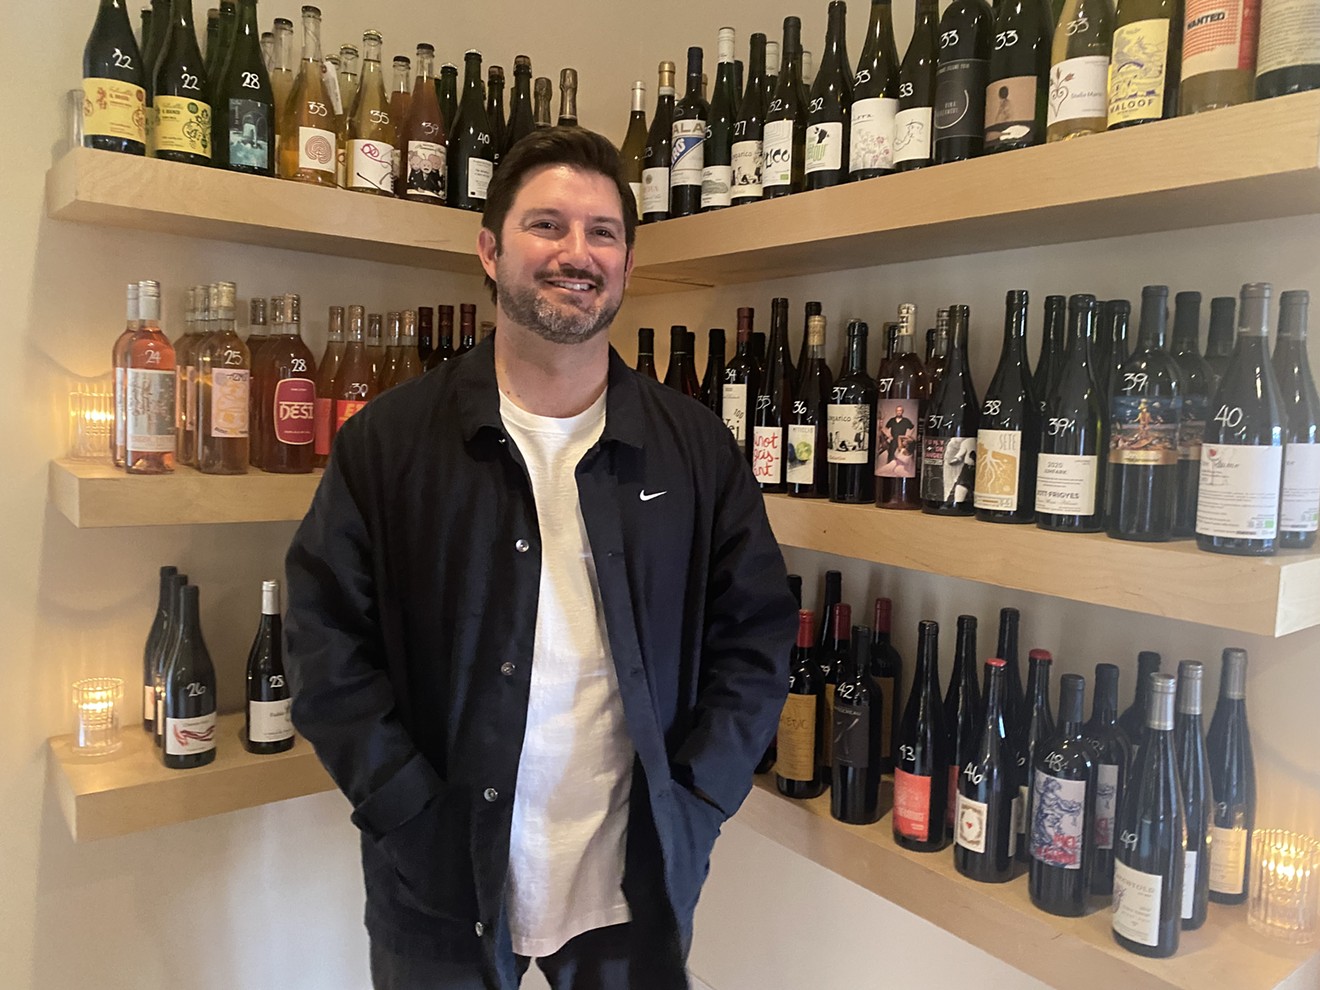 Chris Lingua opened Sauvage Wine Bar & Shop to showcase his passion for natural wines.